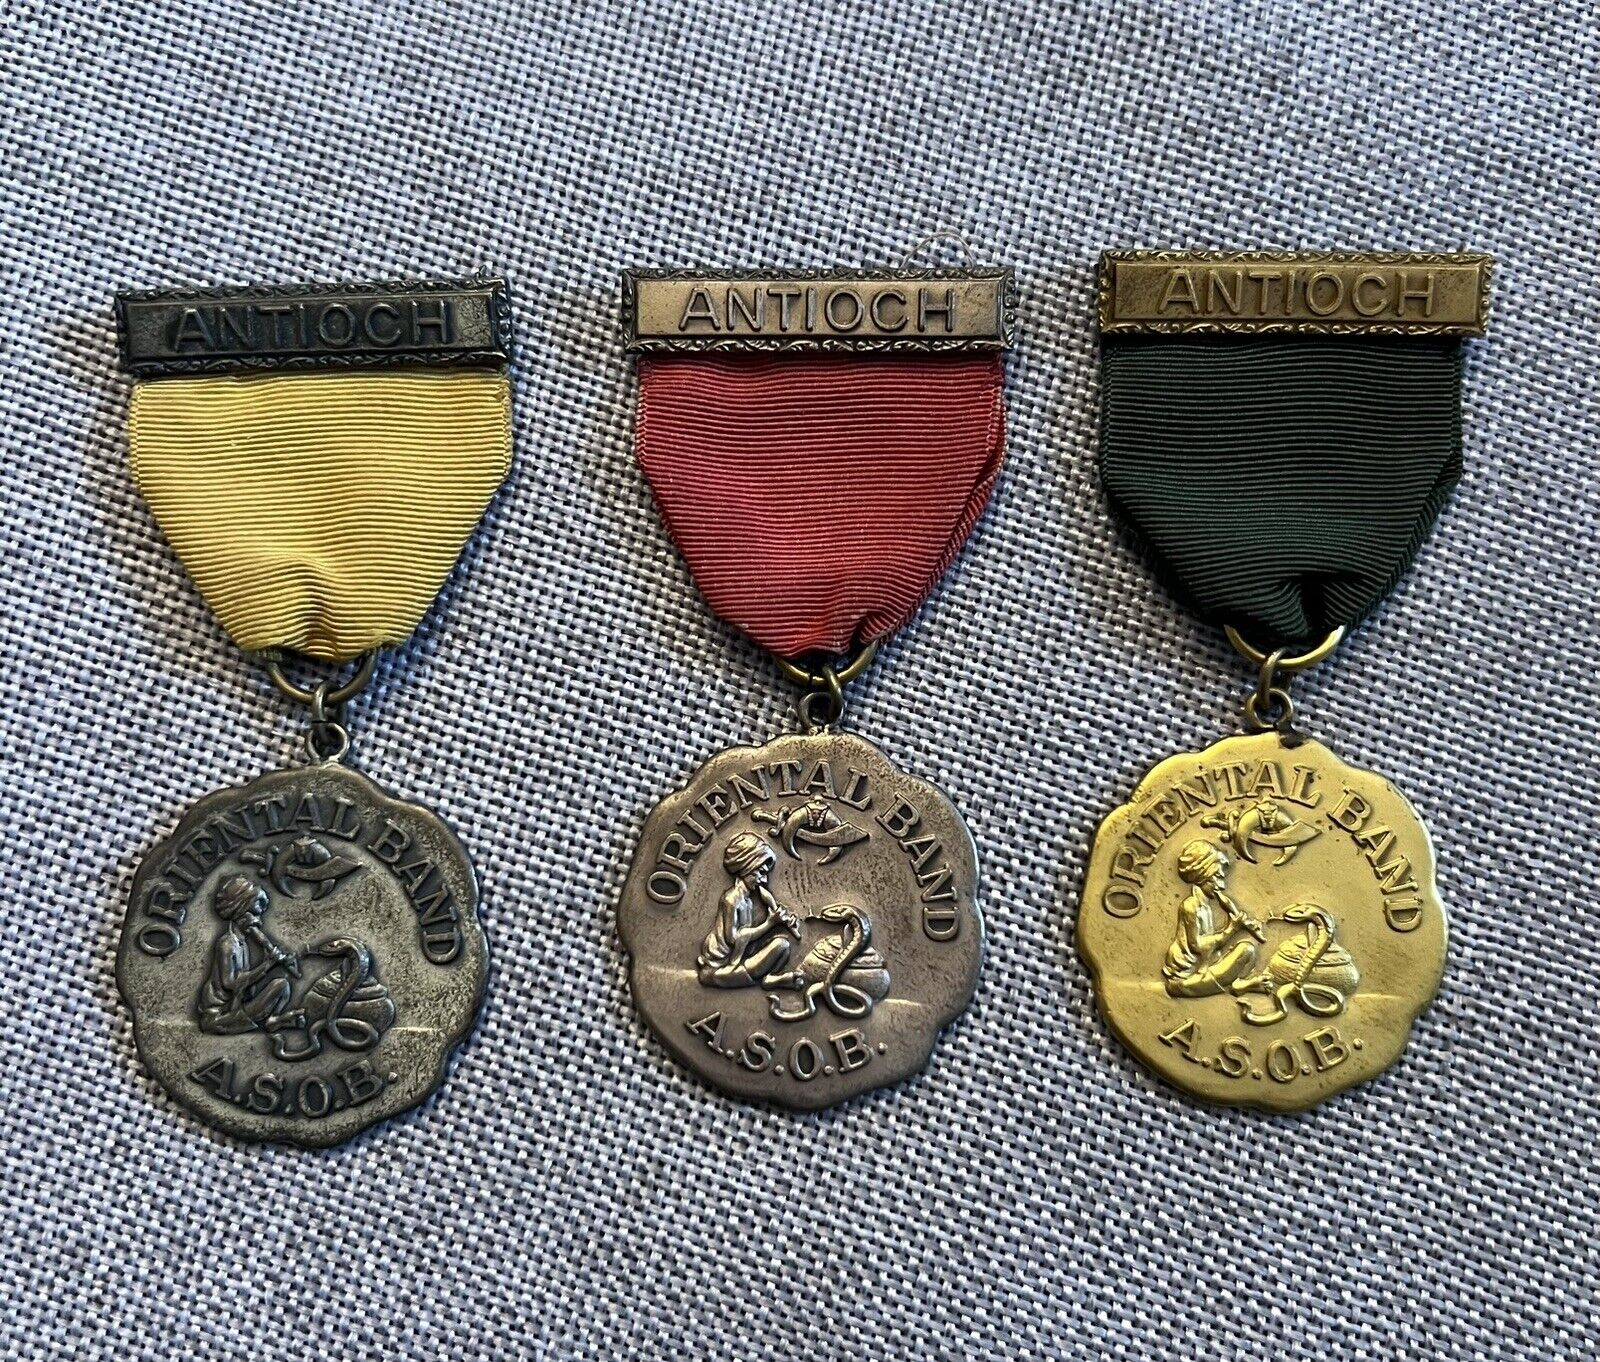 Shriners Vintage Medals 3 Antioch Oriental Band Red, Green, Yellow A.S.O.B.